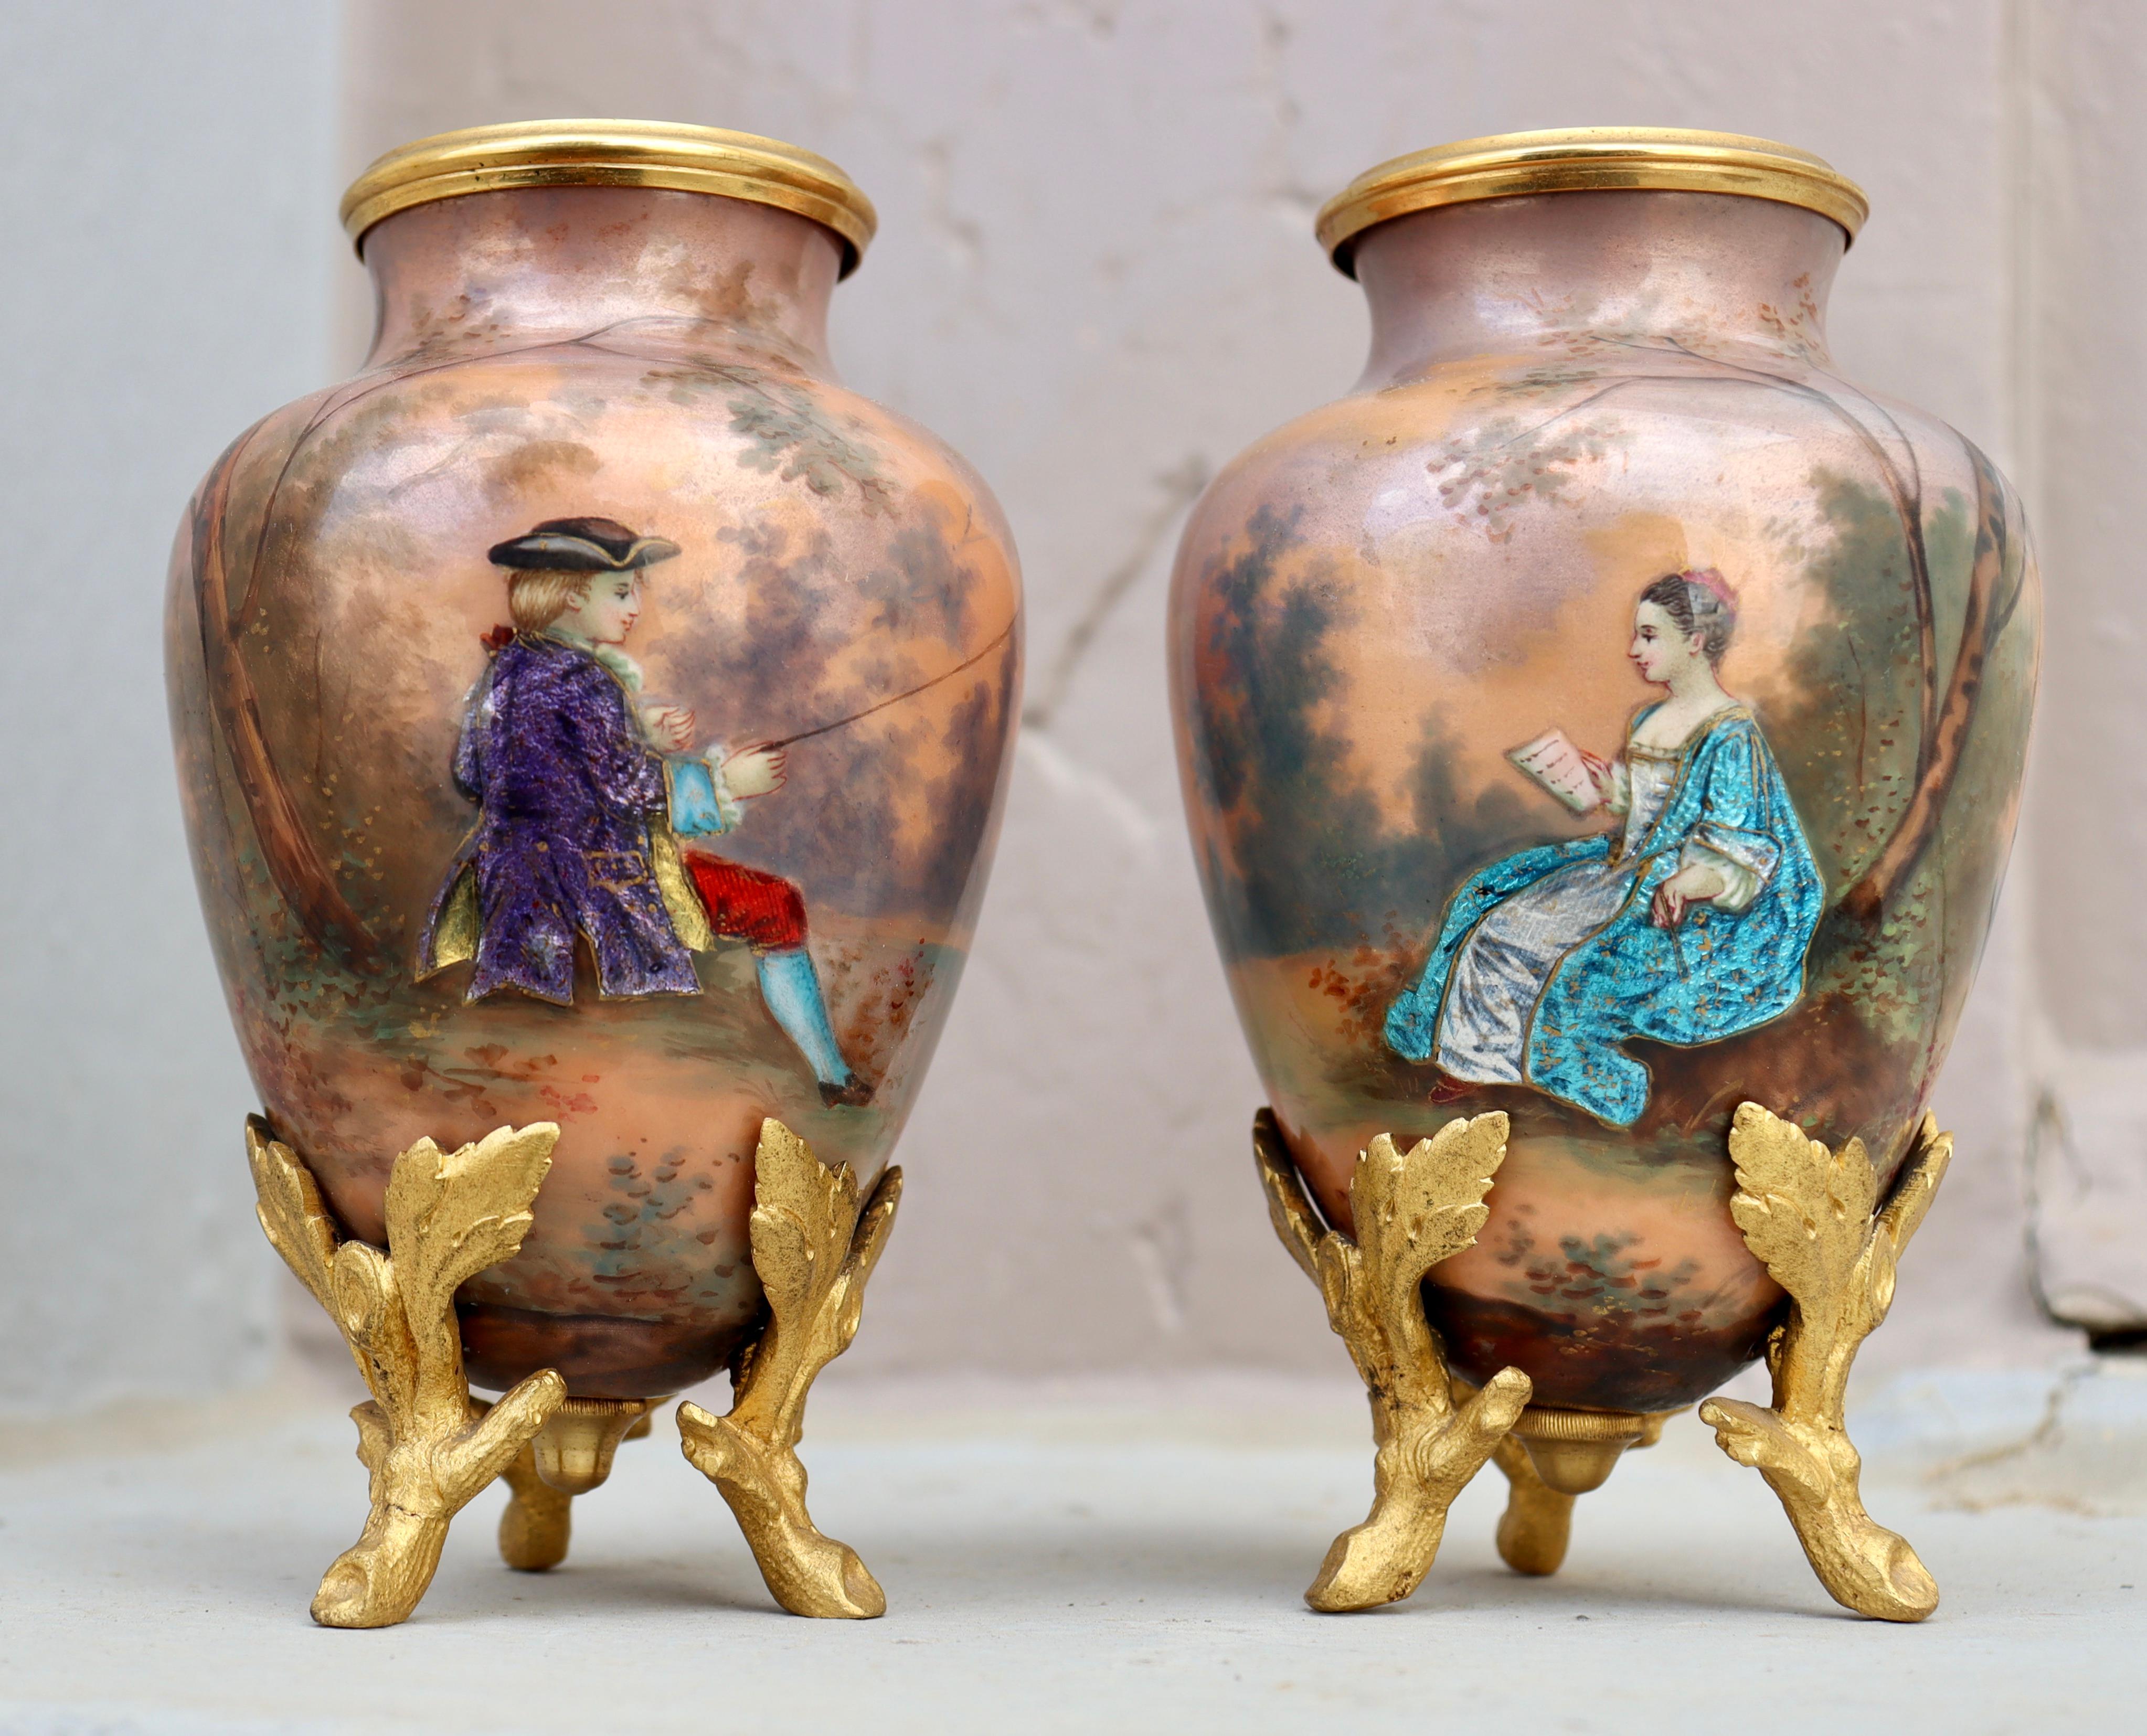 A 19th century pair of Limoges enamel on copper miniatures vases
Hand-painted polychromed enamel design of pastoral scene showing a couple of romantic lovers
Resting on three ormolu feet simulating leaves and branches
With original flowers